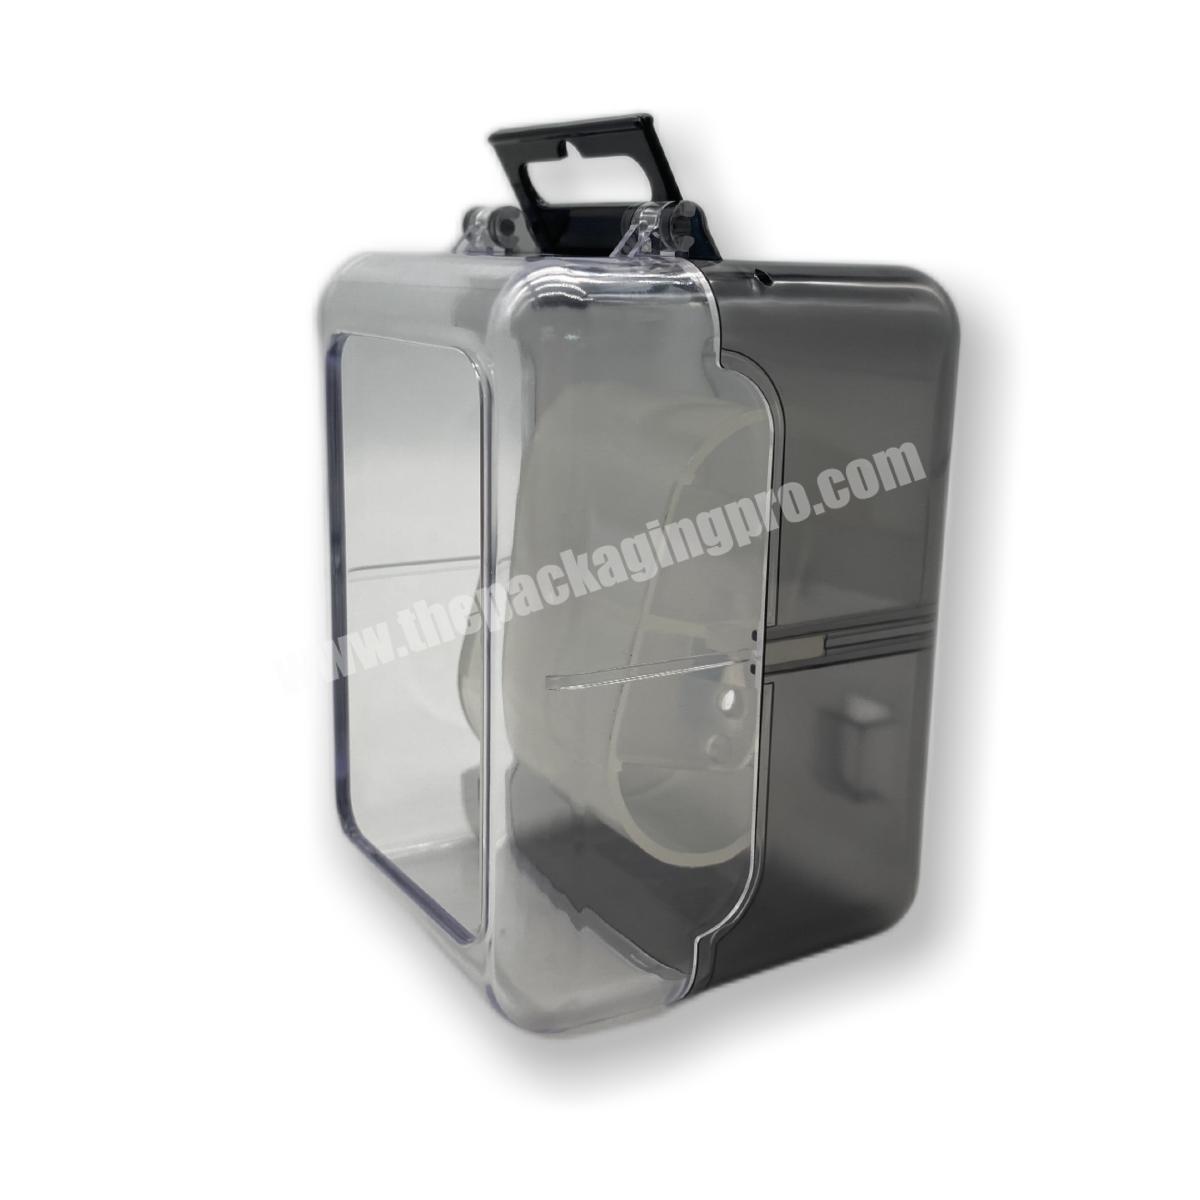 Translucent Black Watch Box Empty Cover Watch Packaging Box Plastic Watch Case